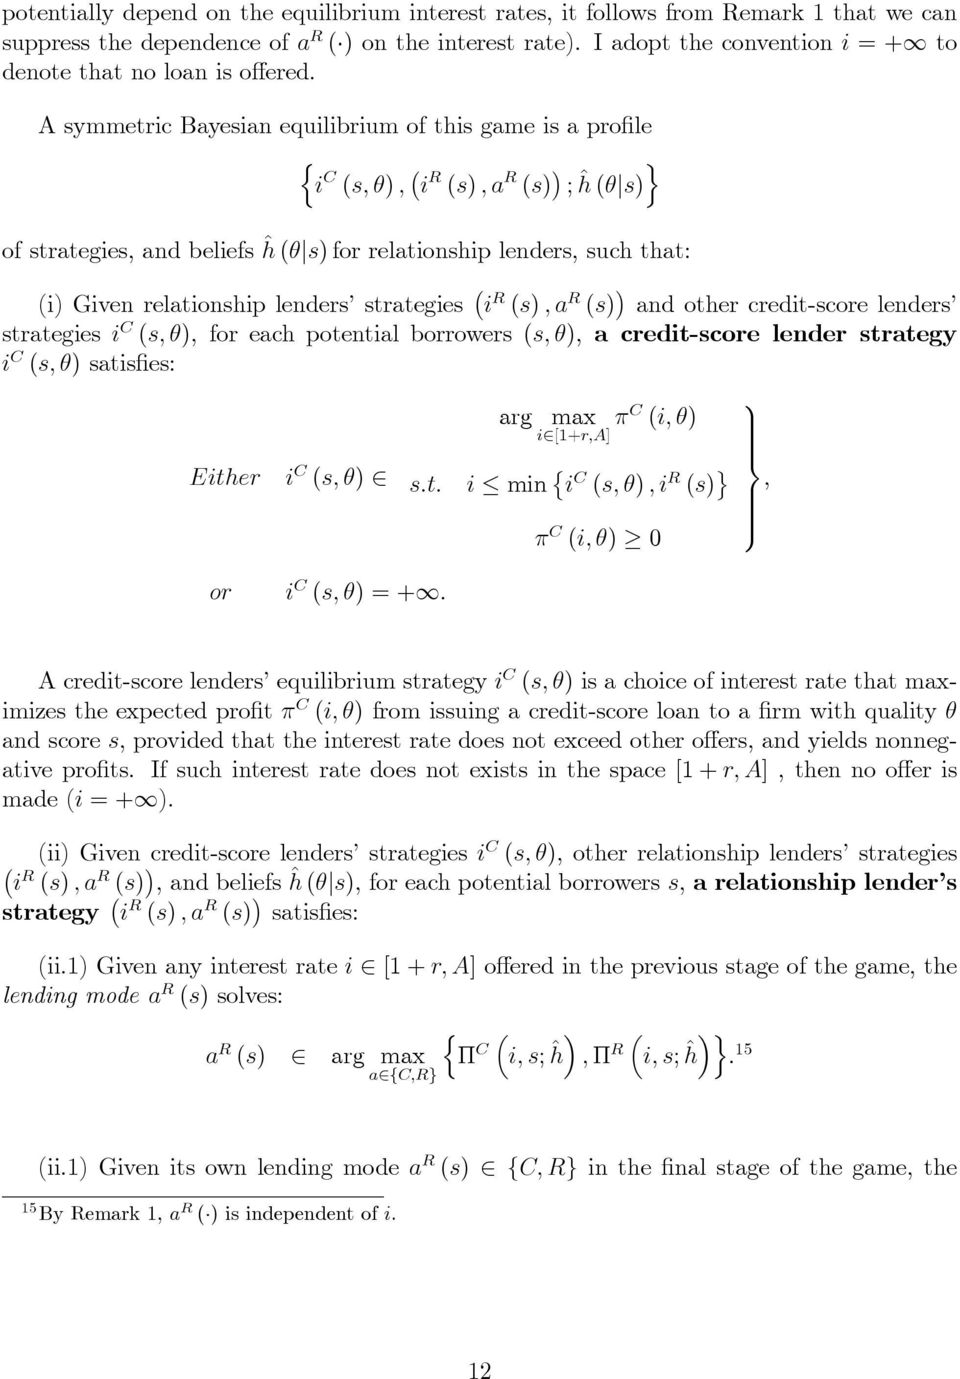 A symmetric Bayesian equilibrium of this game is a pro le n i C (s; ) ; i R (s) ; a R (s) ; ^h o (js) of strategies, and beliefs ^h (js) for relationship lenders, such that: (i) Given relationship